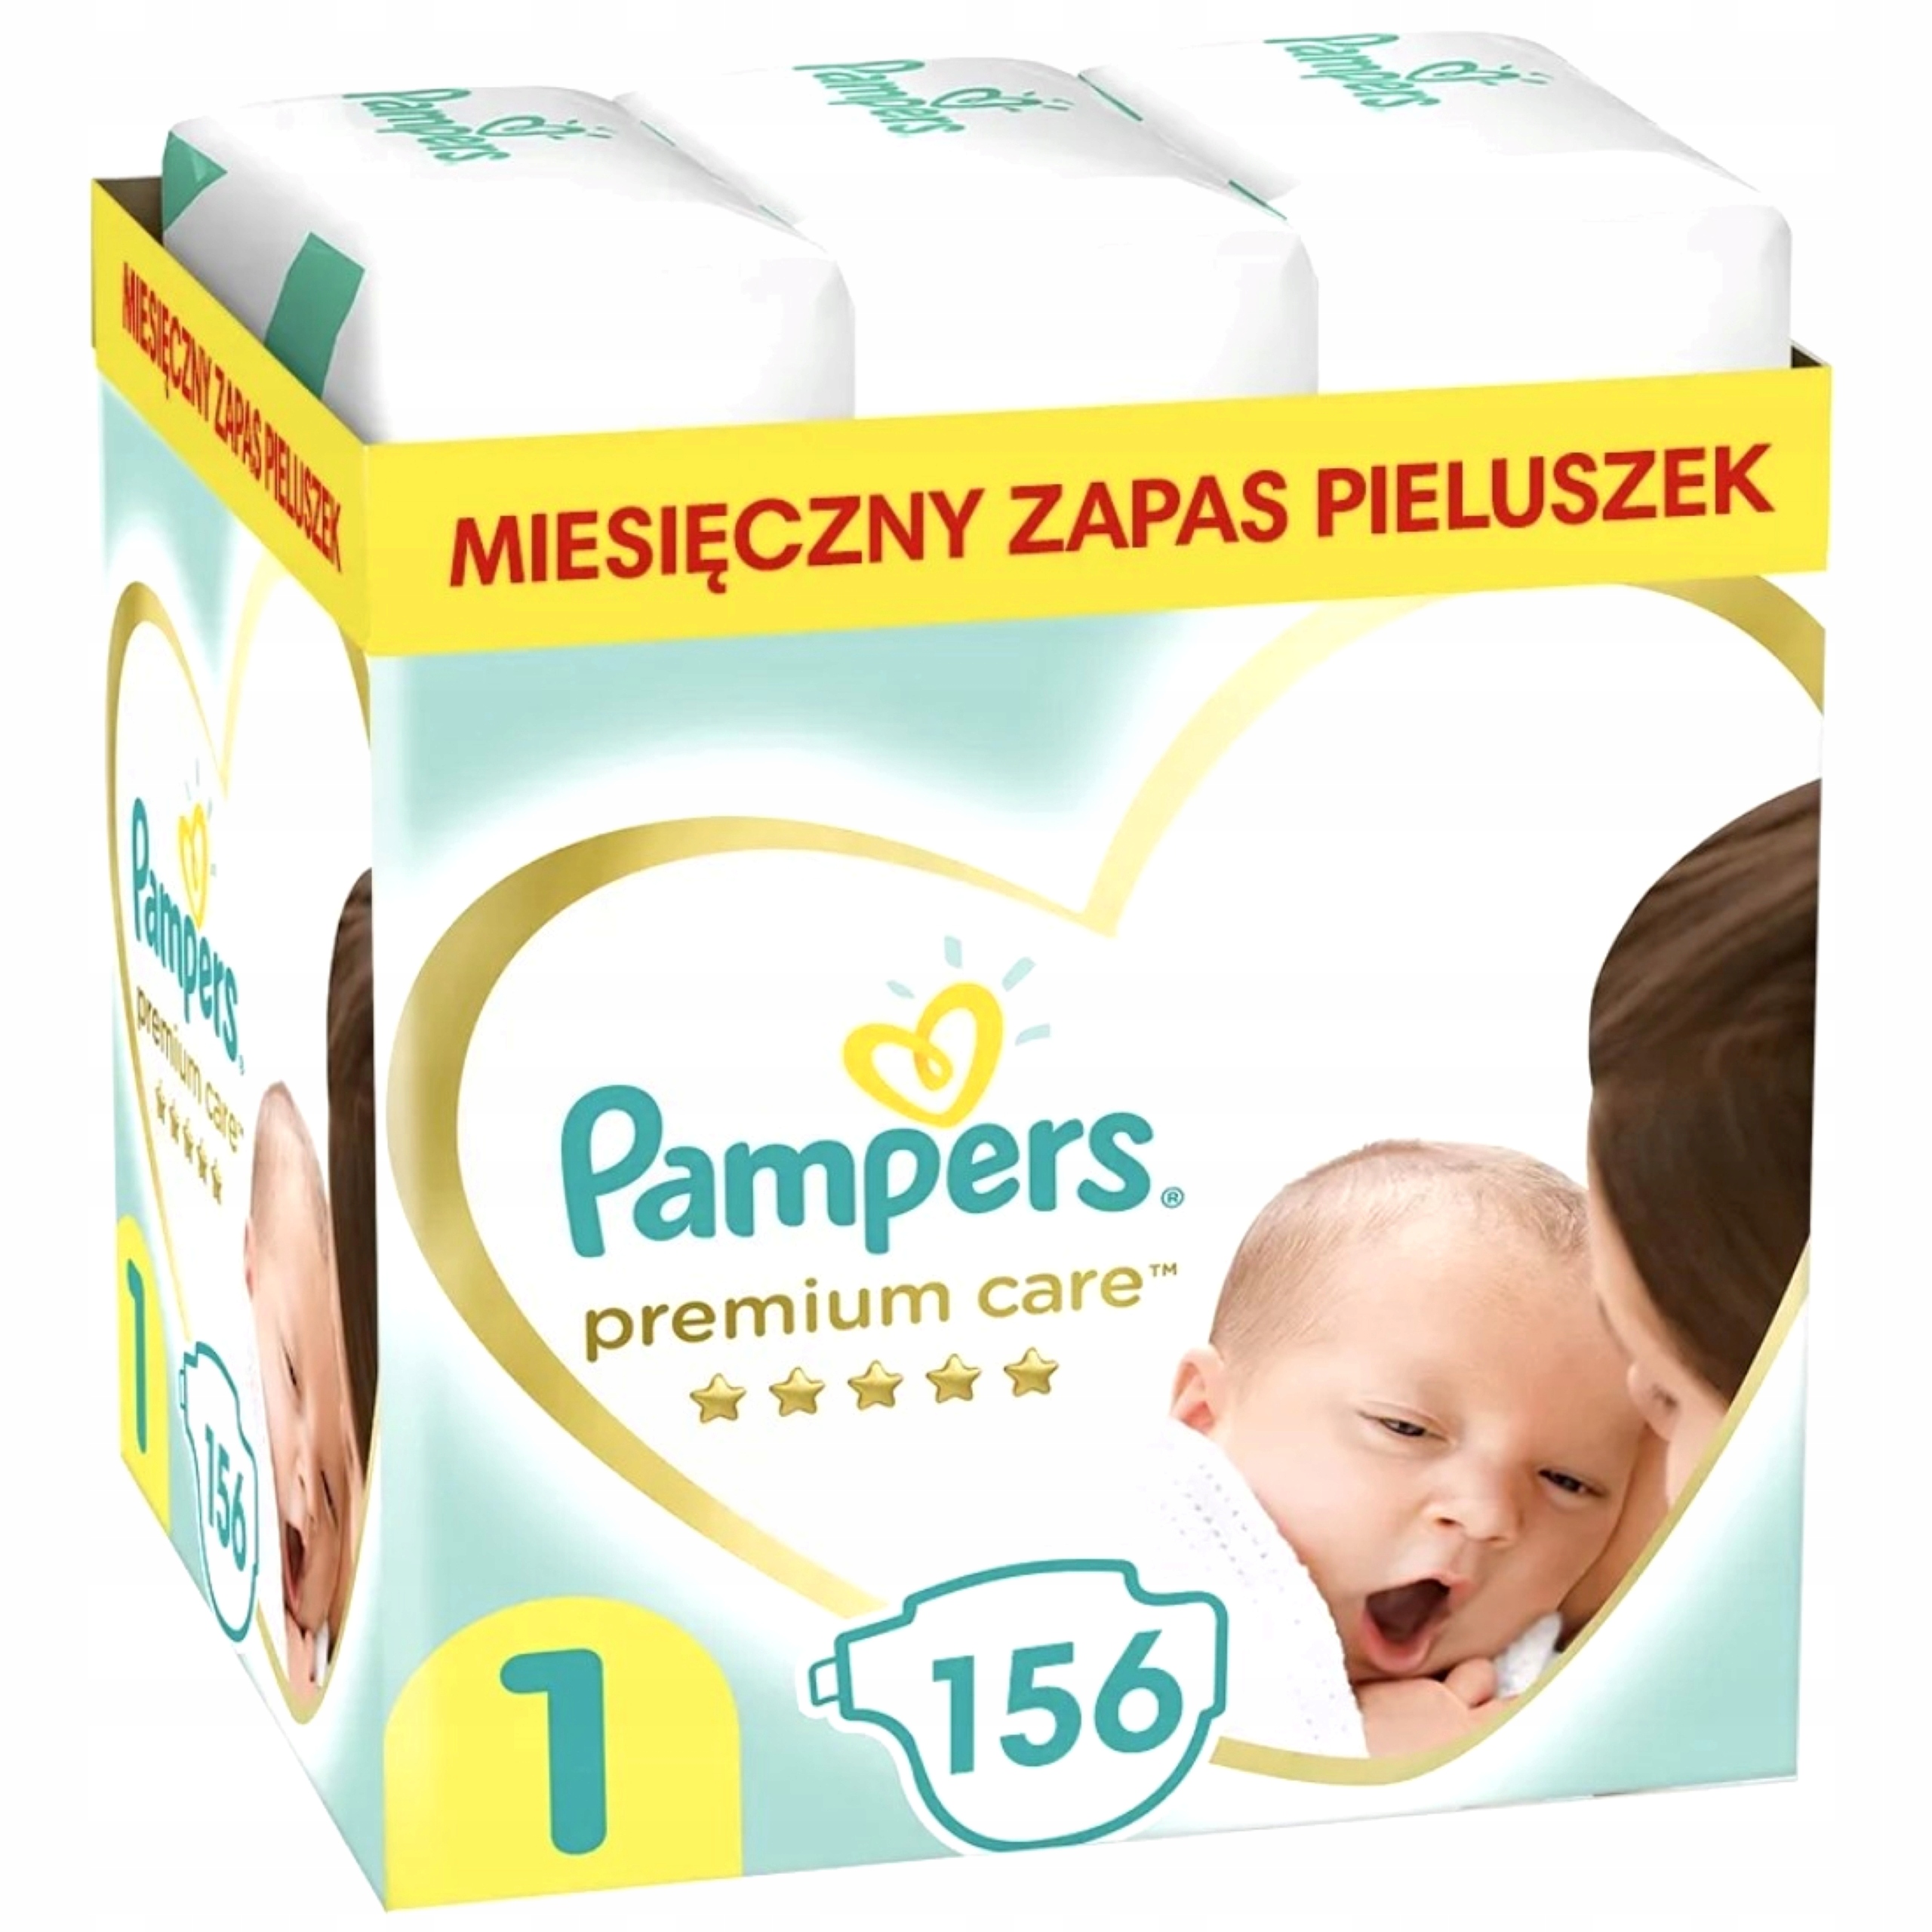 pampers 3 site ceneo.pl